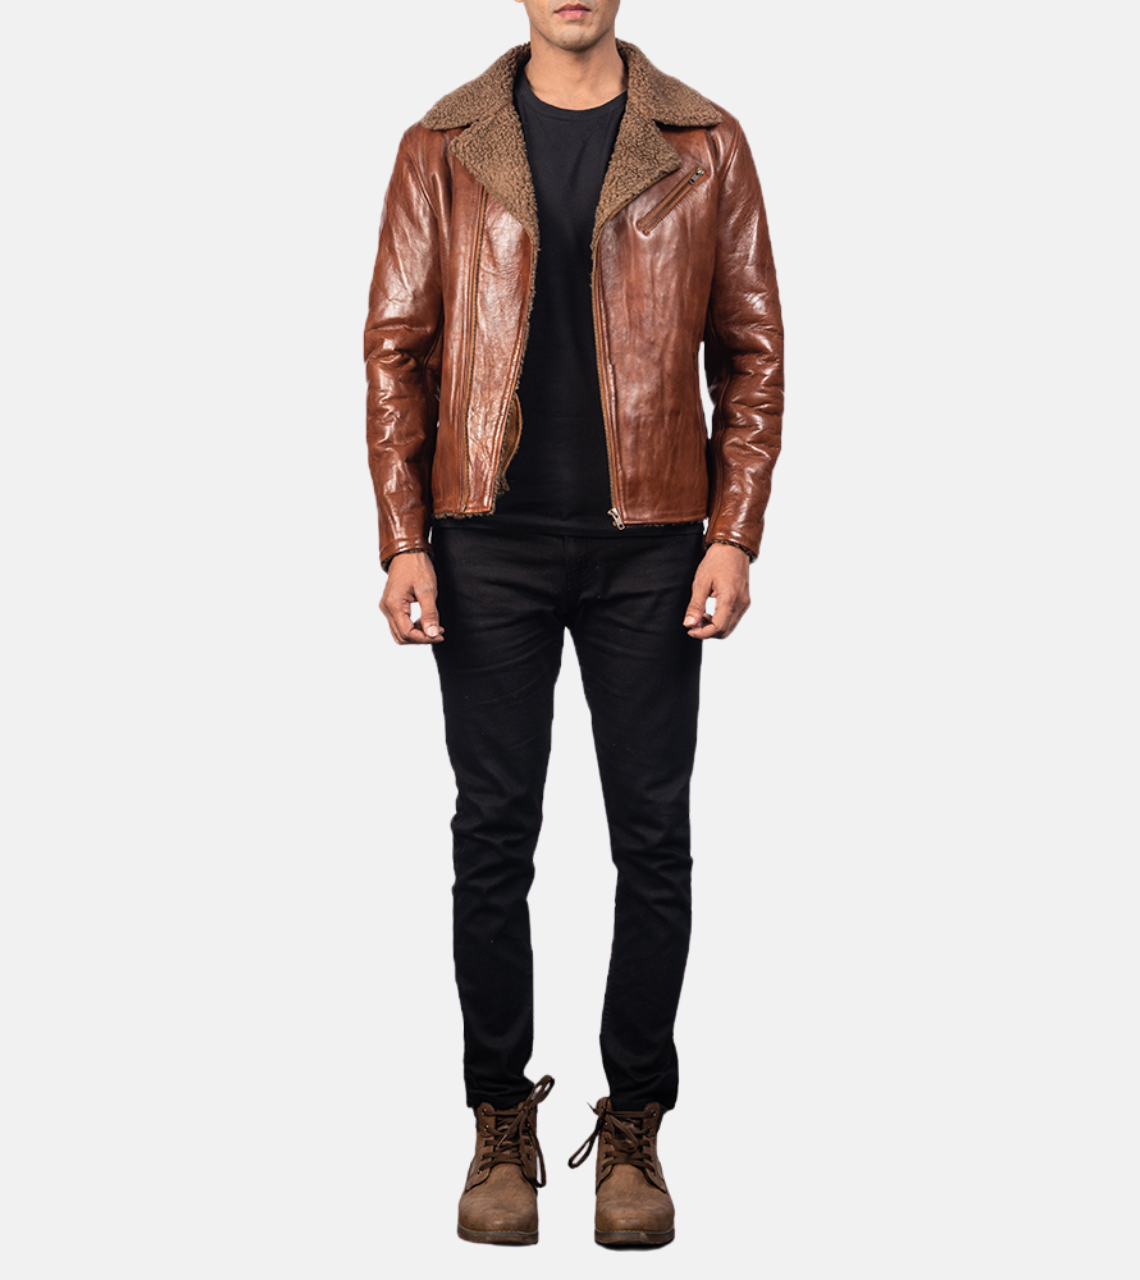  Pacific Shearling Men's Leather Bomber Jacket 